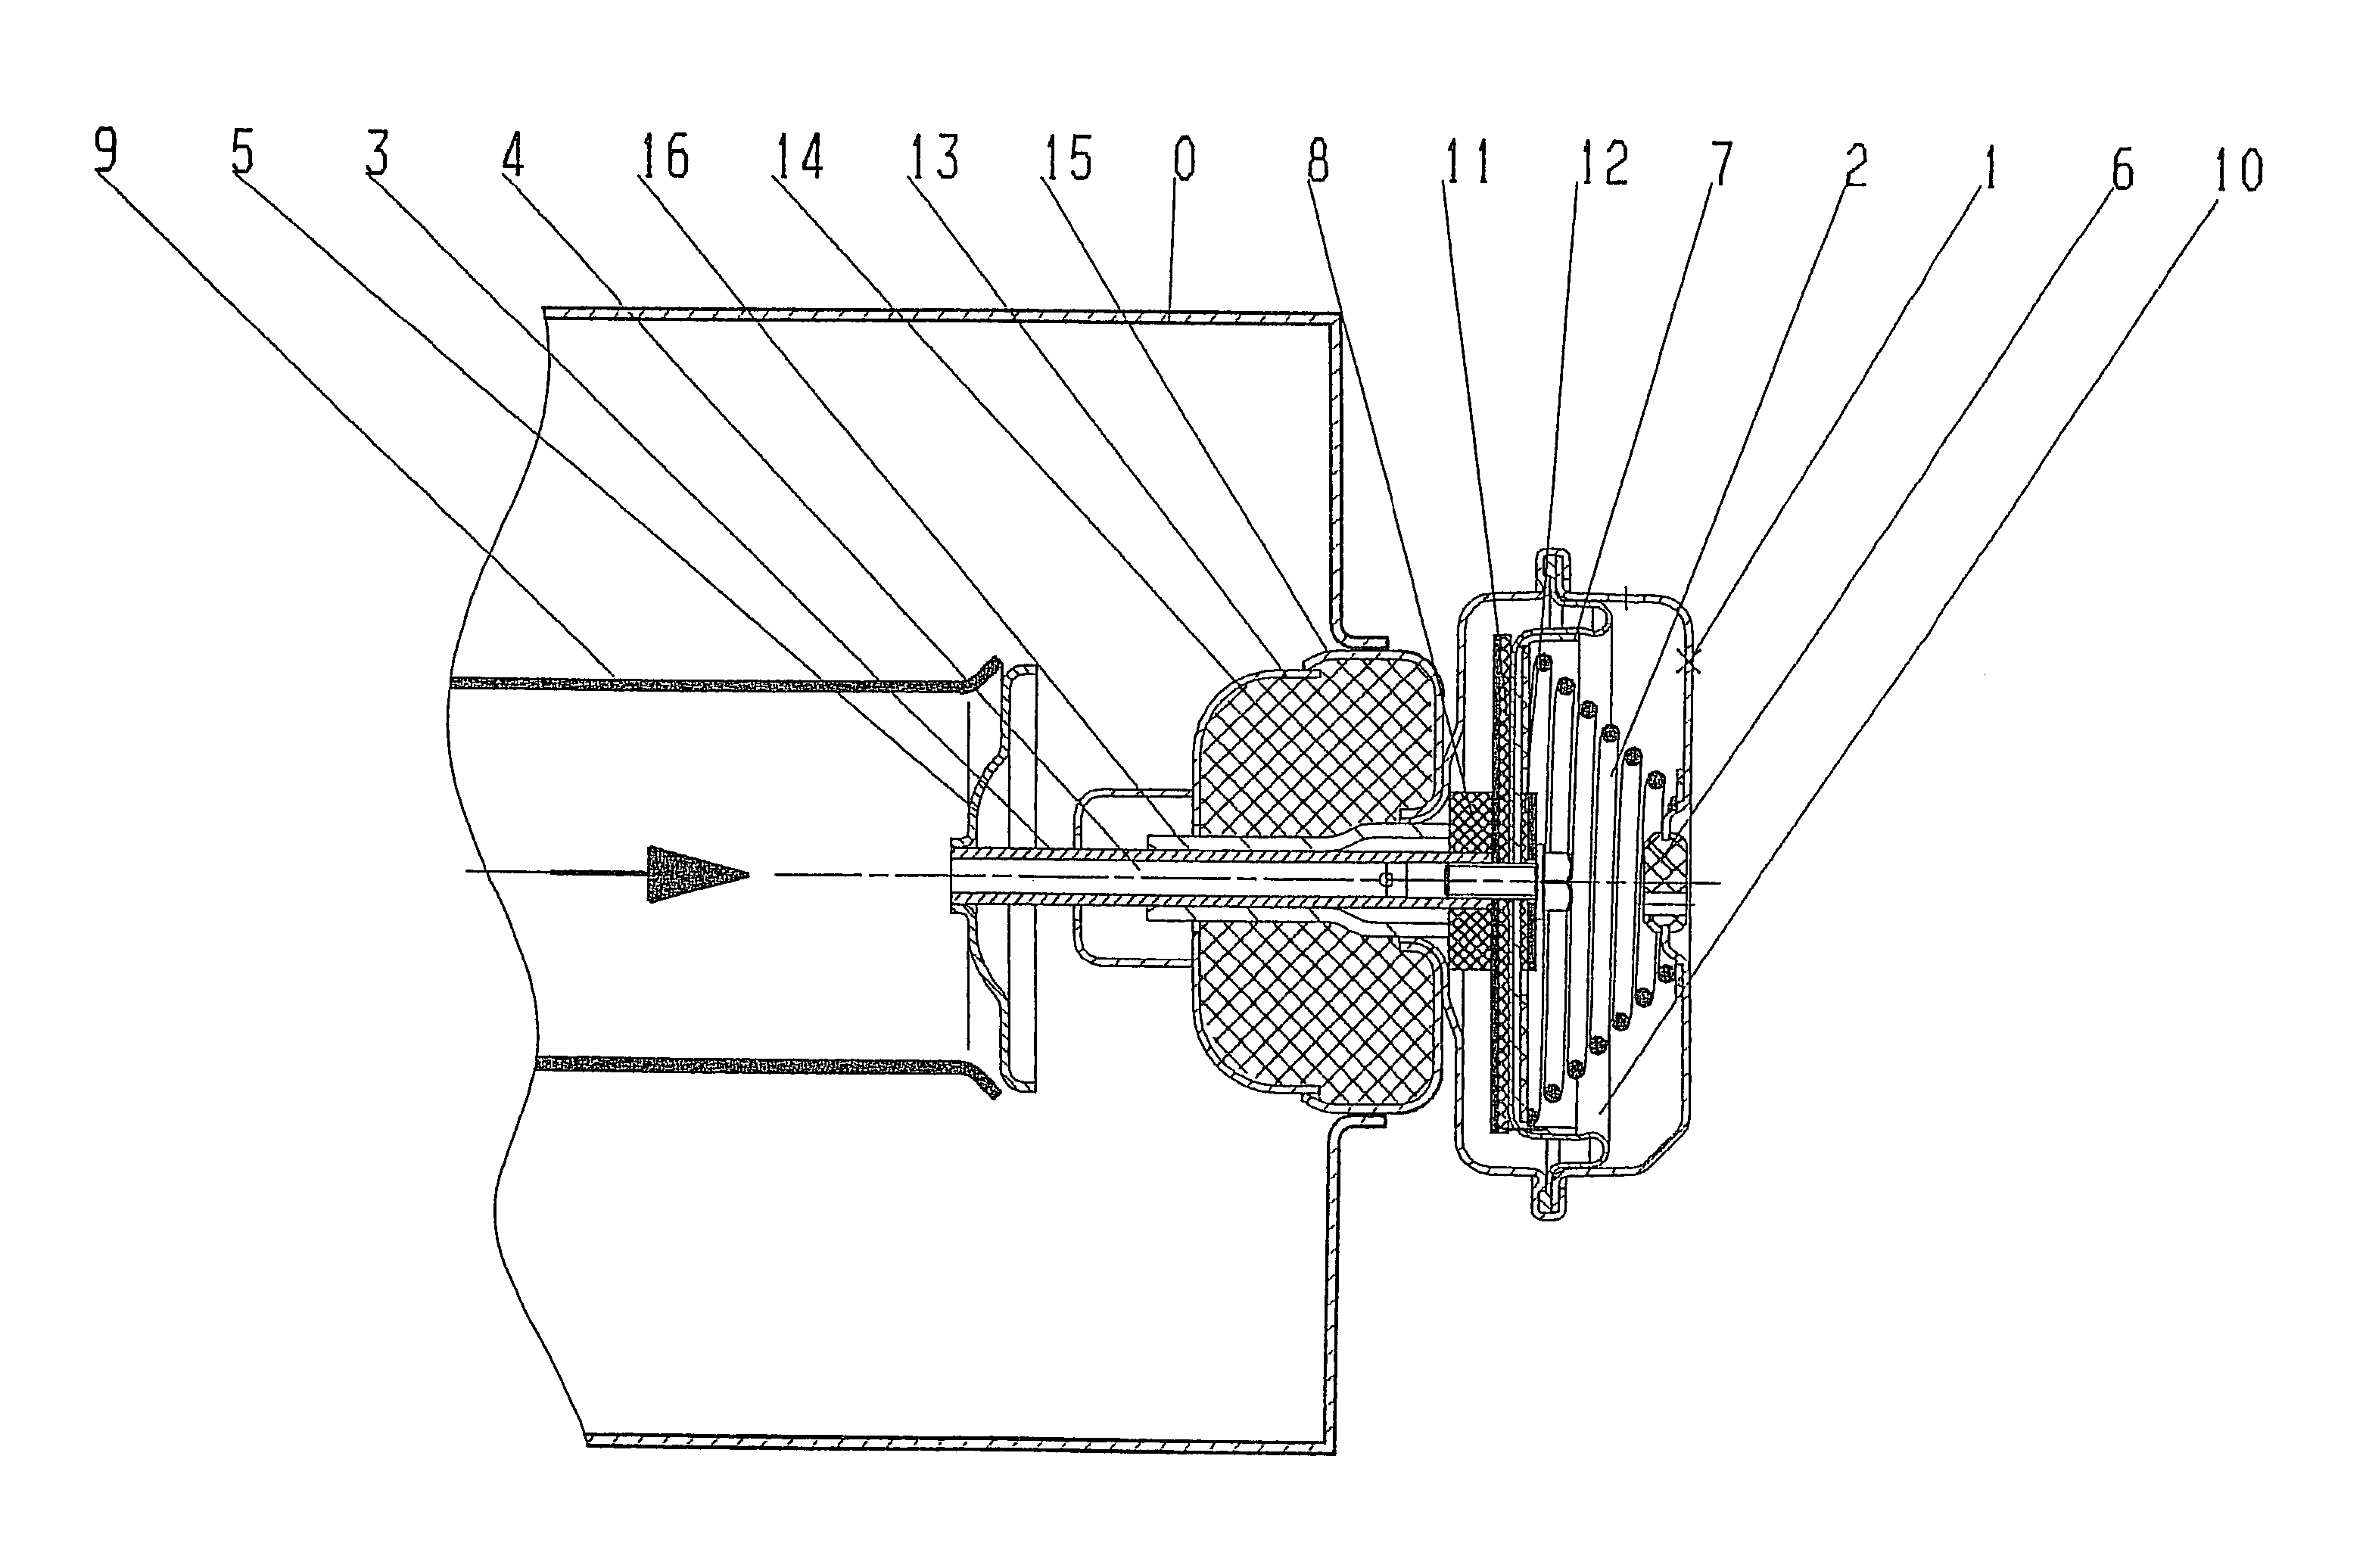 Muffler with variable acoustic properties